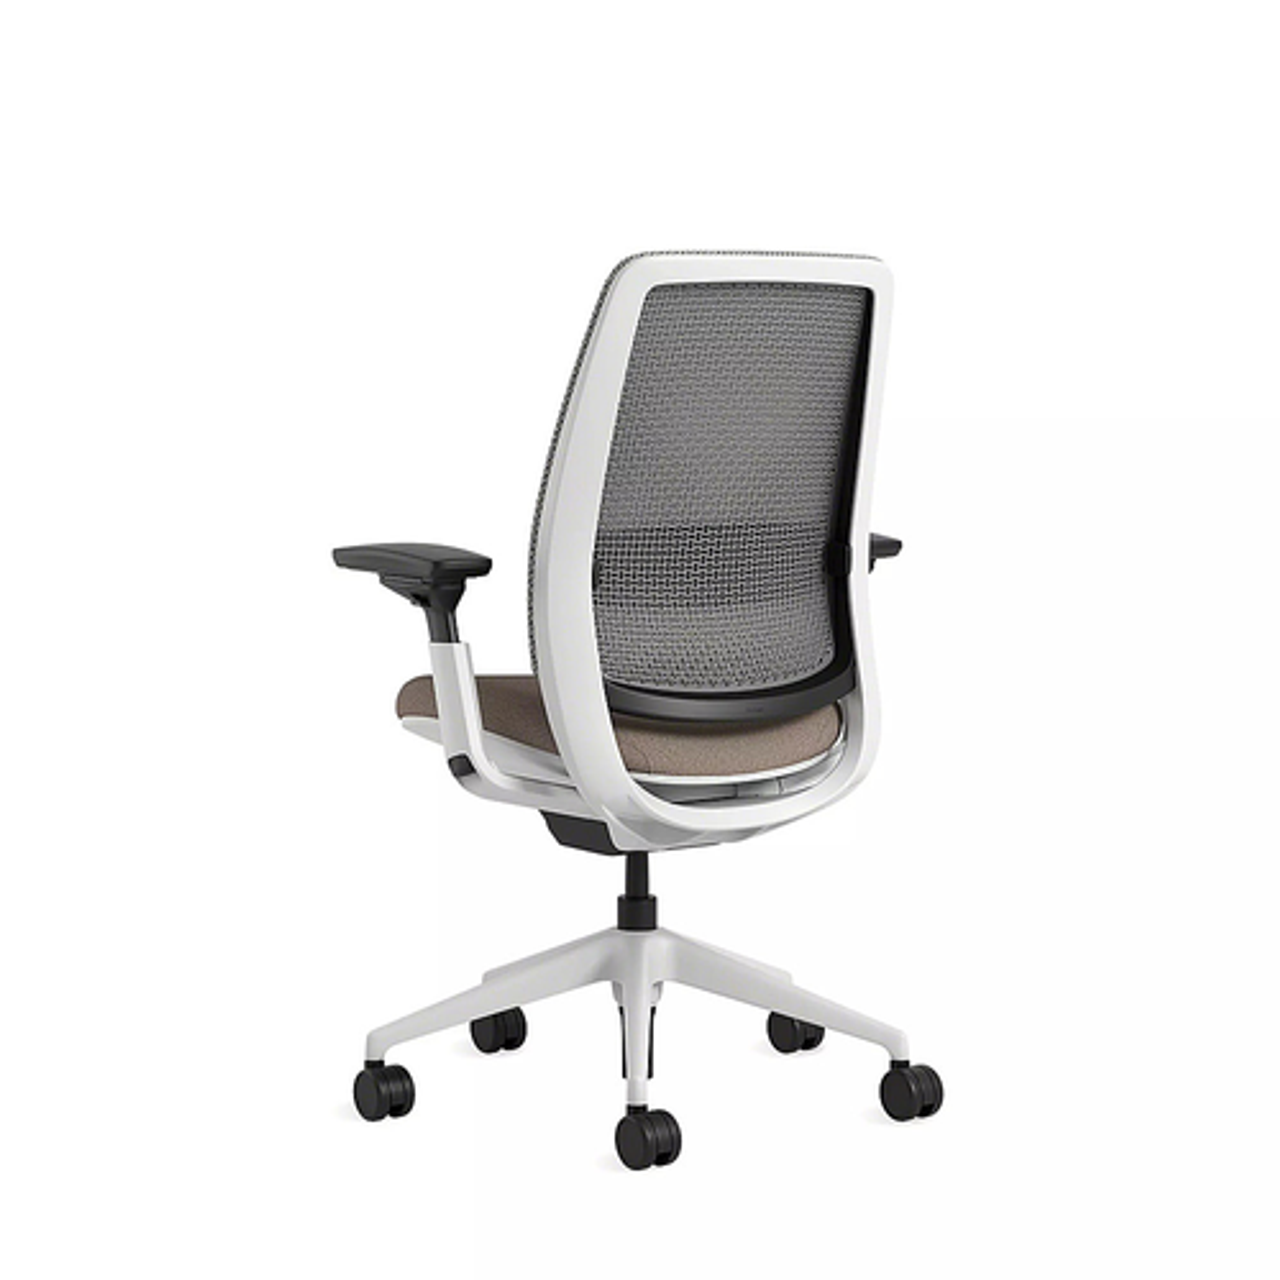 Steelcase Series 2 3D Airback Chair with Seagull Frame in Truffle Fabric and Nickel Mesh with Hard Floor Casters